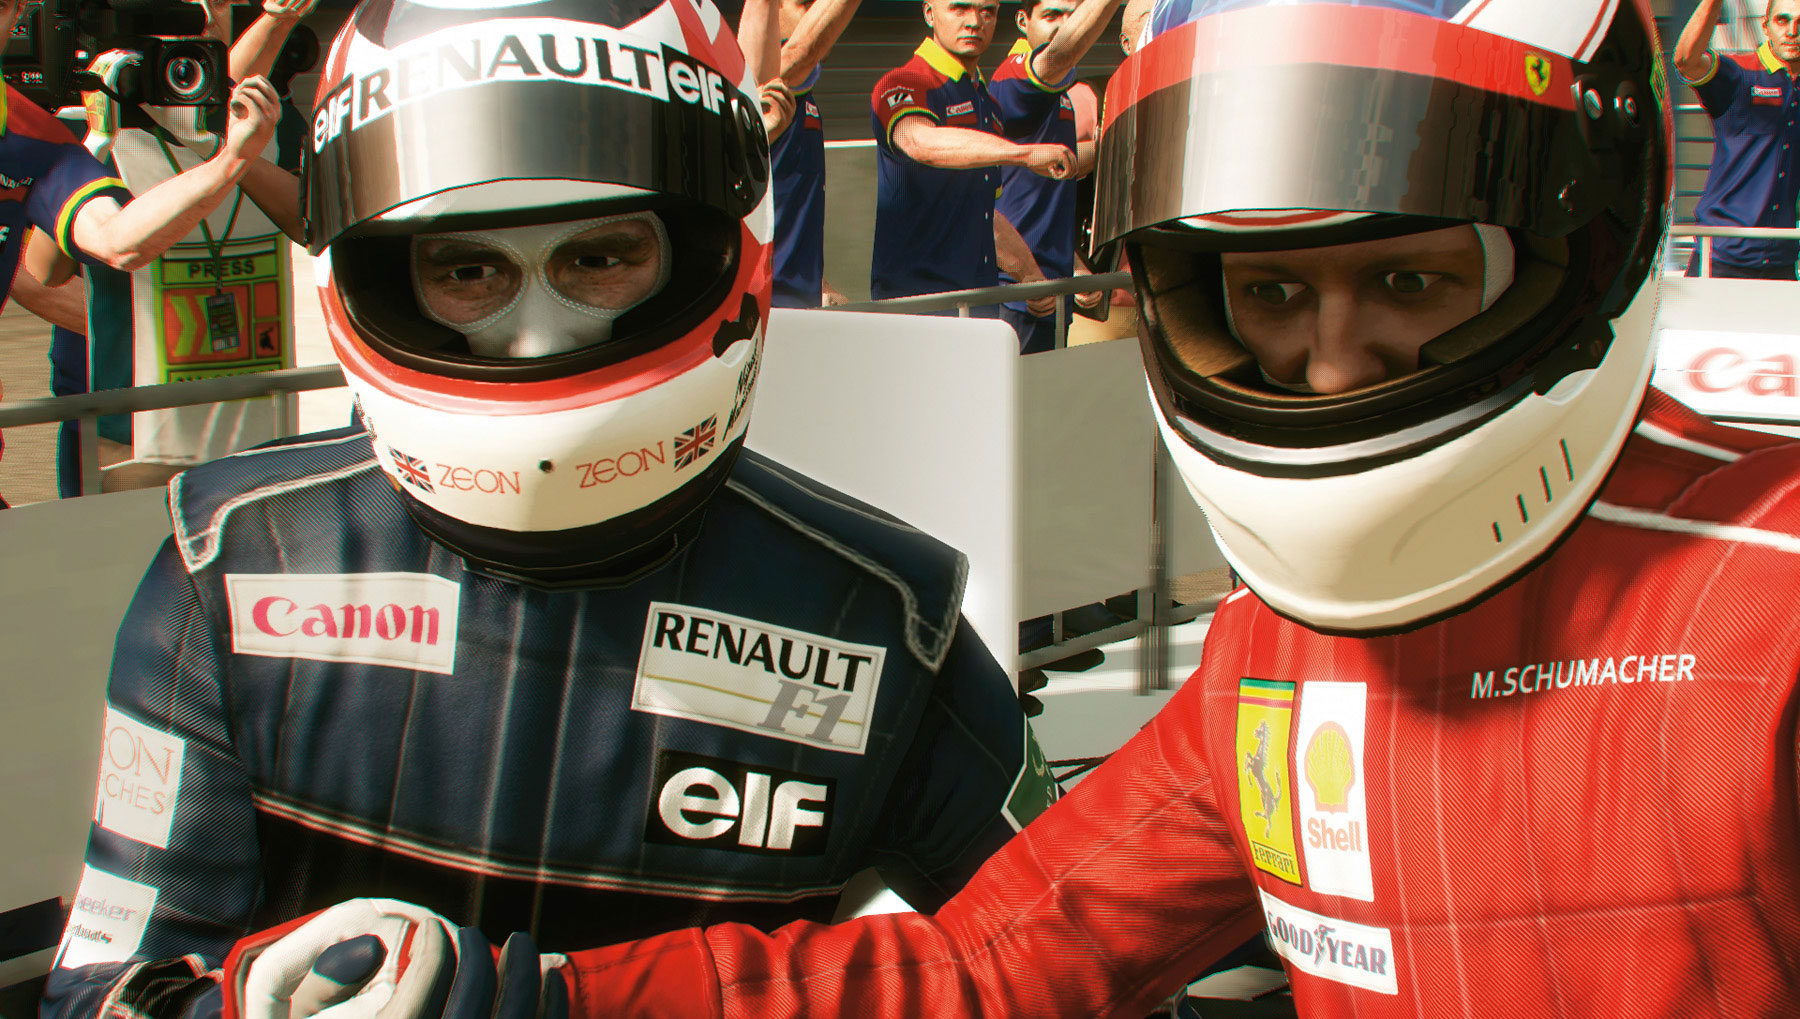 F1 2013's first patch will feature blinking.